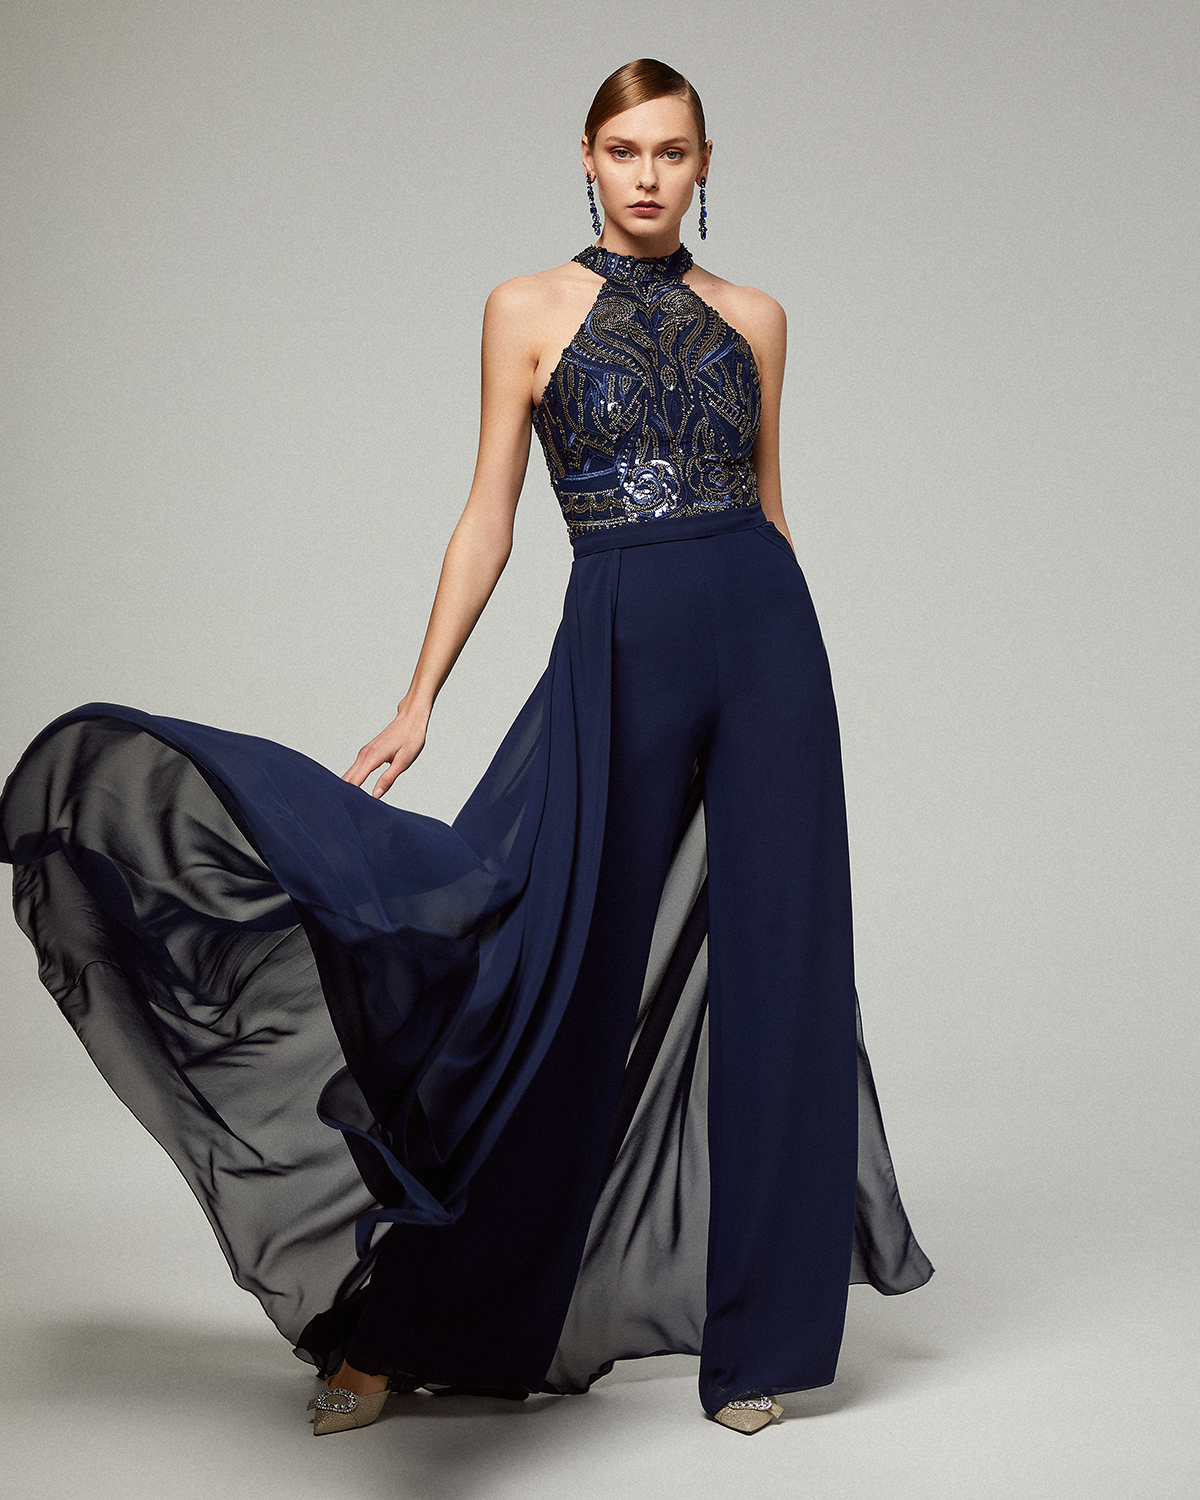 Evening Dresses / Evening jumpsuit with beaded top and chiffon skirt